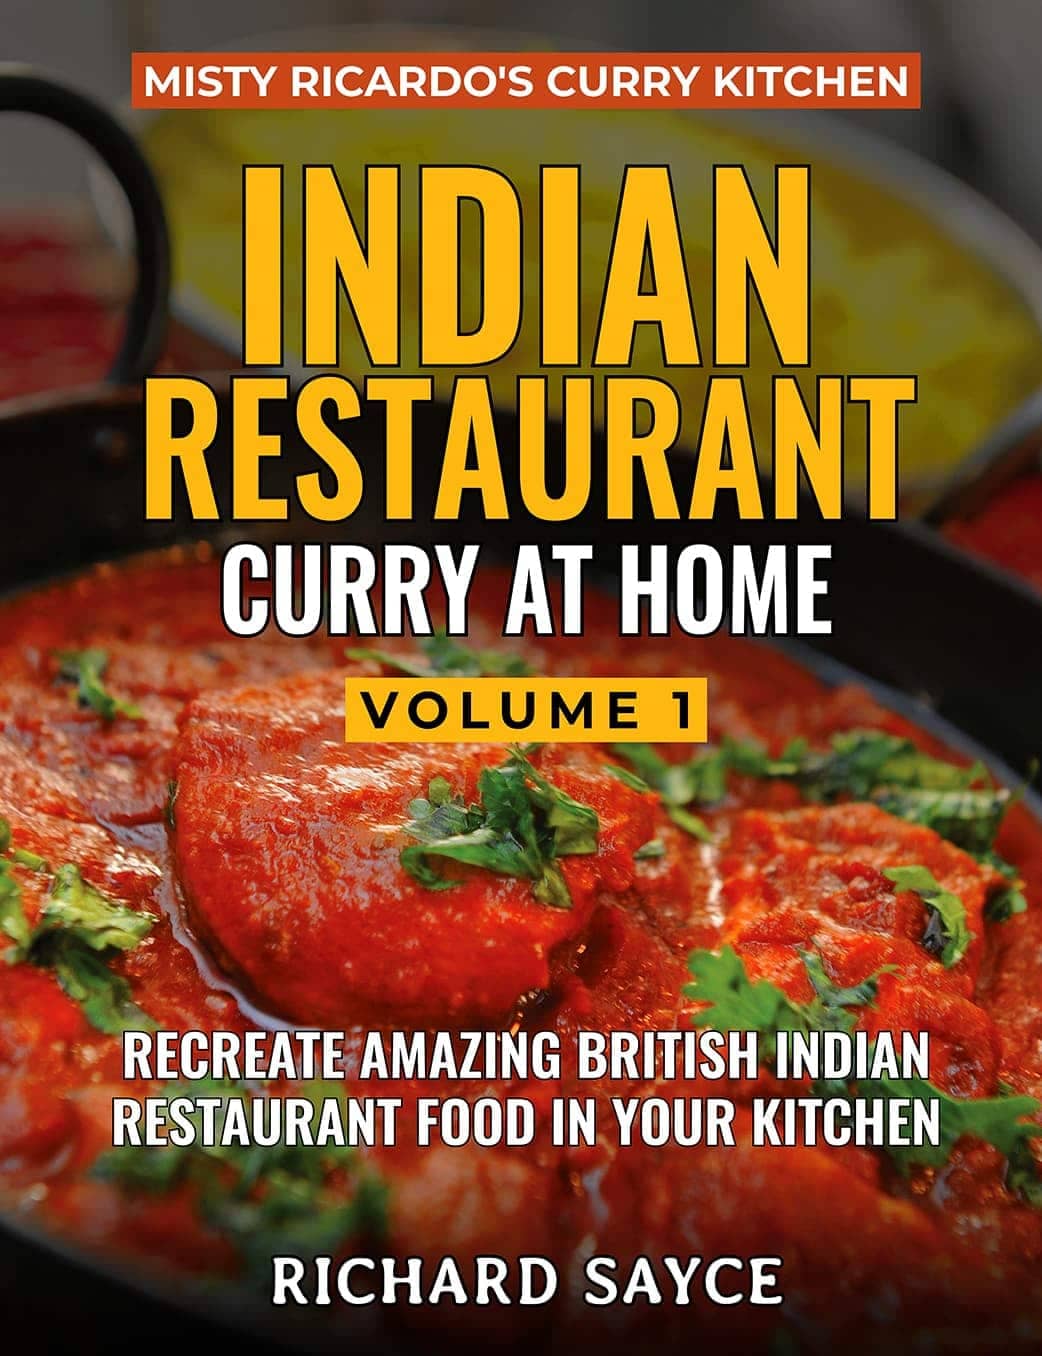 Indian Restaurant Curry at Home Volume 1